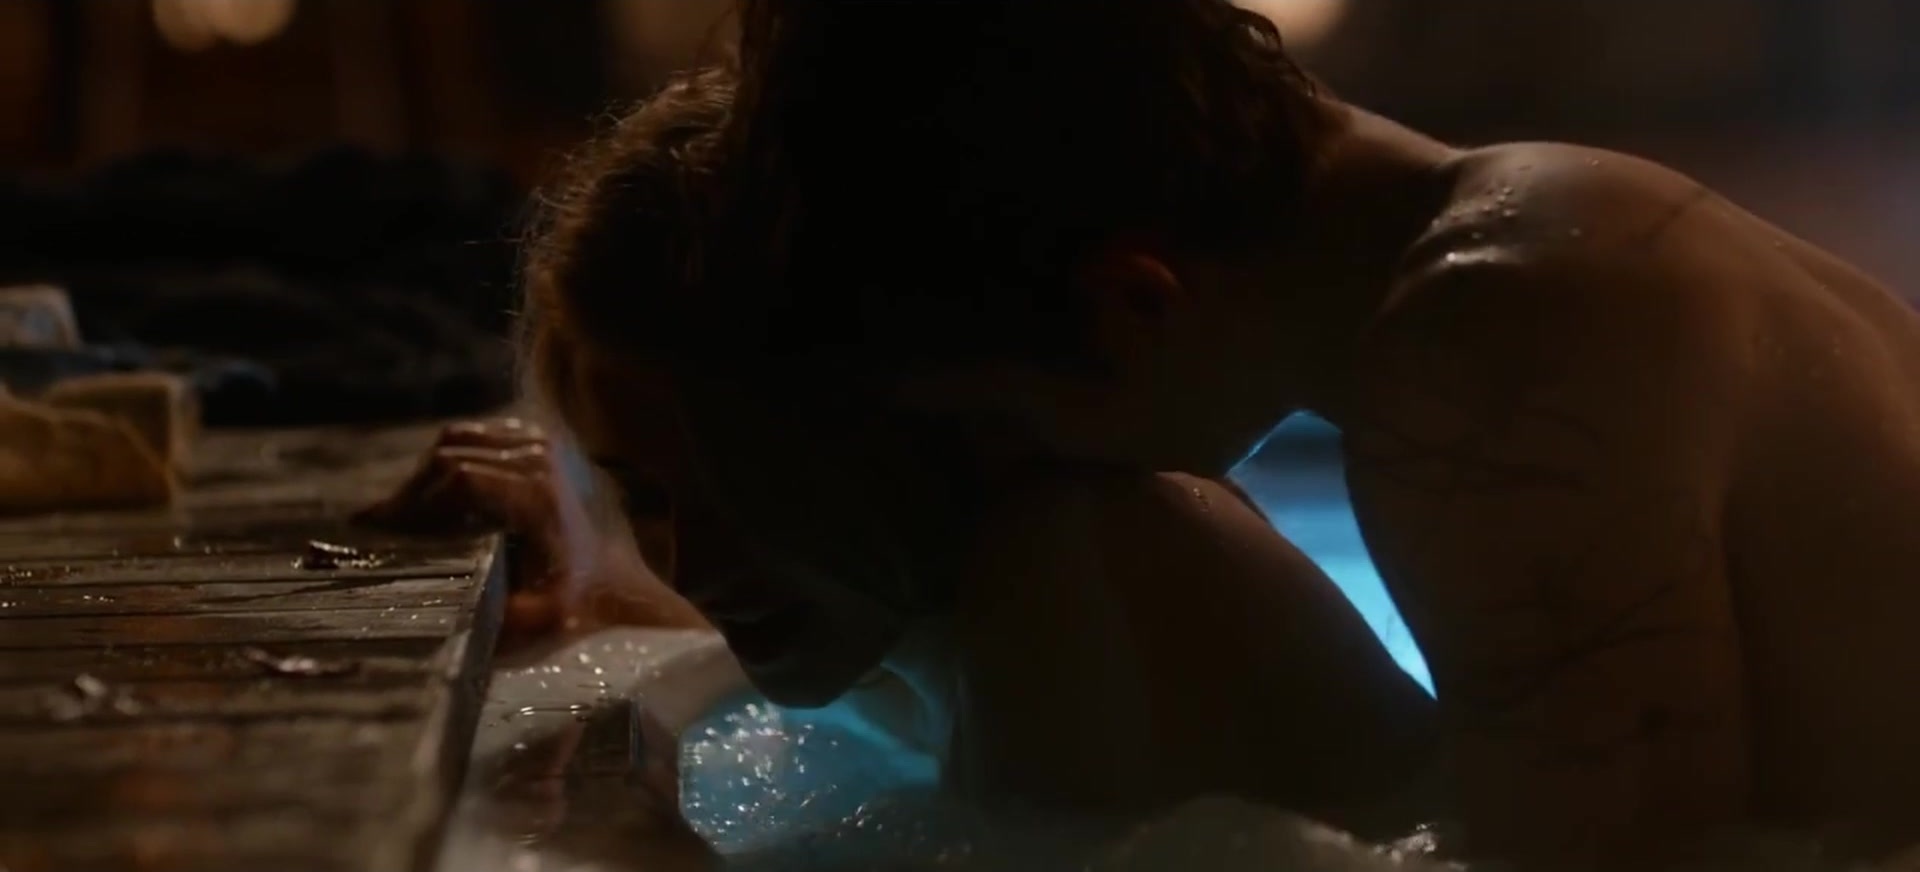 Josephine Langford has sexy moments in the movie “After We Fell” which was ...